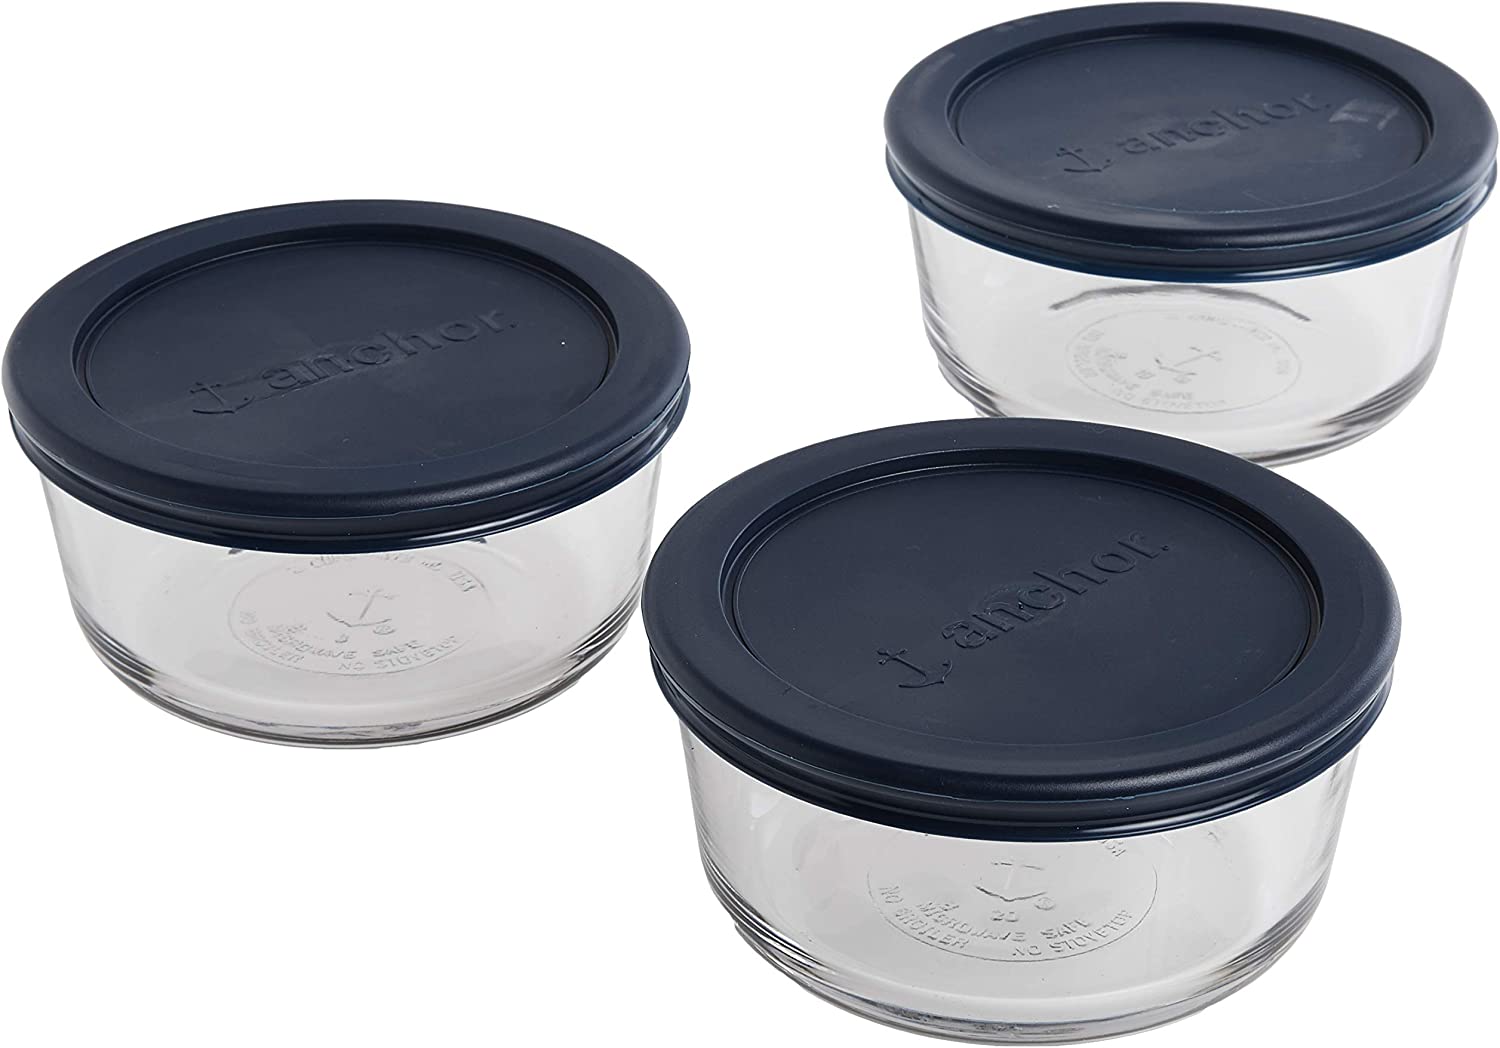 6-Piece Anchor Hocking 2-Cup Round Glass Food Storage Containers (3 Containers & 3 Lids) $6.35 + Free Shipping w/ Prime or on $25+